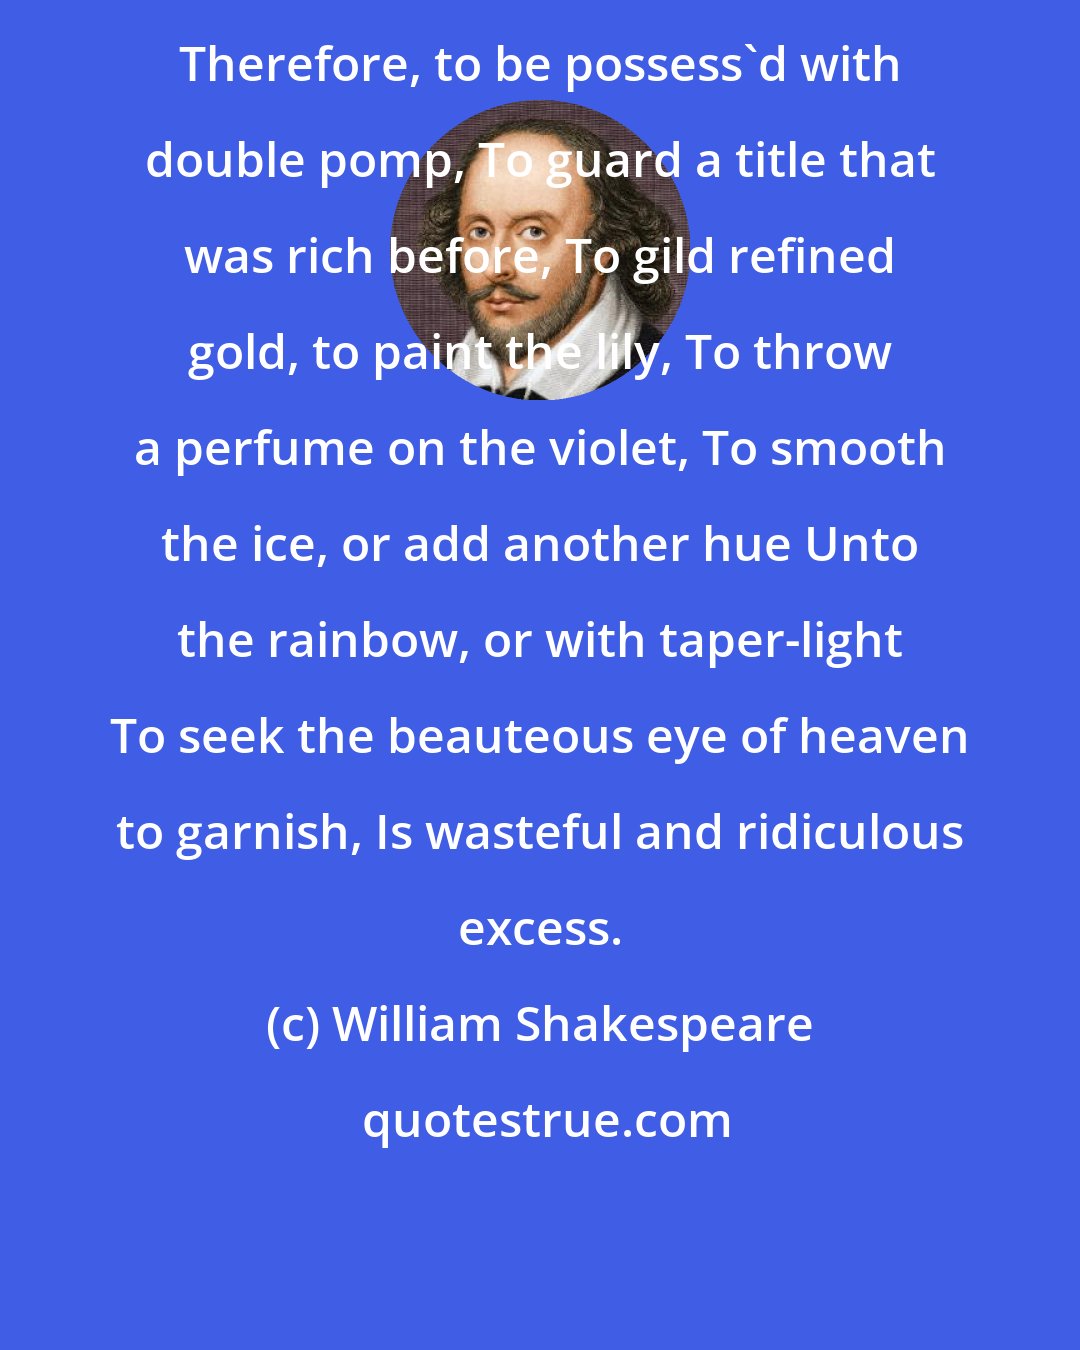 William Shakespeare: Therefore, to be possess'd with double pomp, To guard a title that was rich before, To gild refined gold, to paint the lily, To throw a perfume on the violet, To smooth the ice, or add another hue Unto the rainbow, or with taper-light To seek the beauteous eye of heaven to garnish, Is wasteful and ridiculous excess.